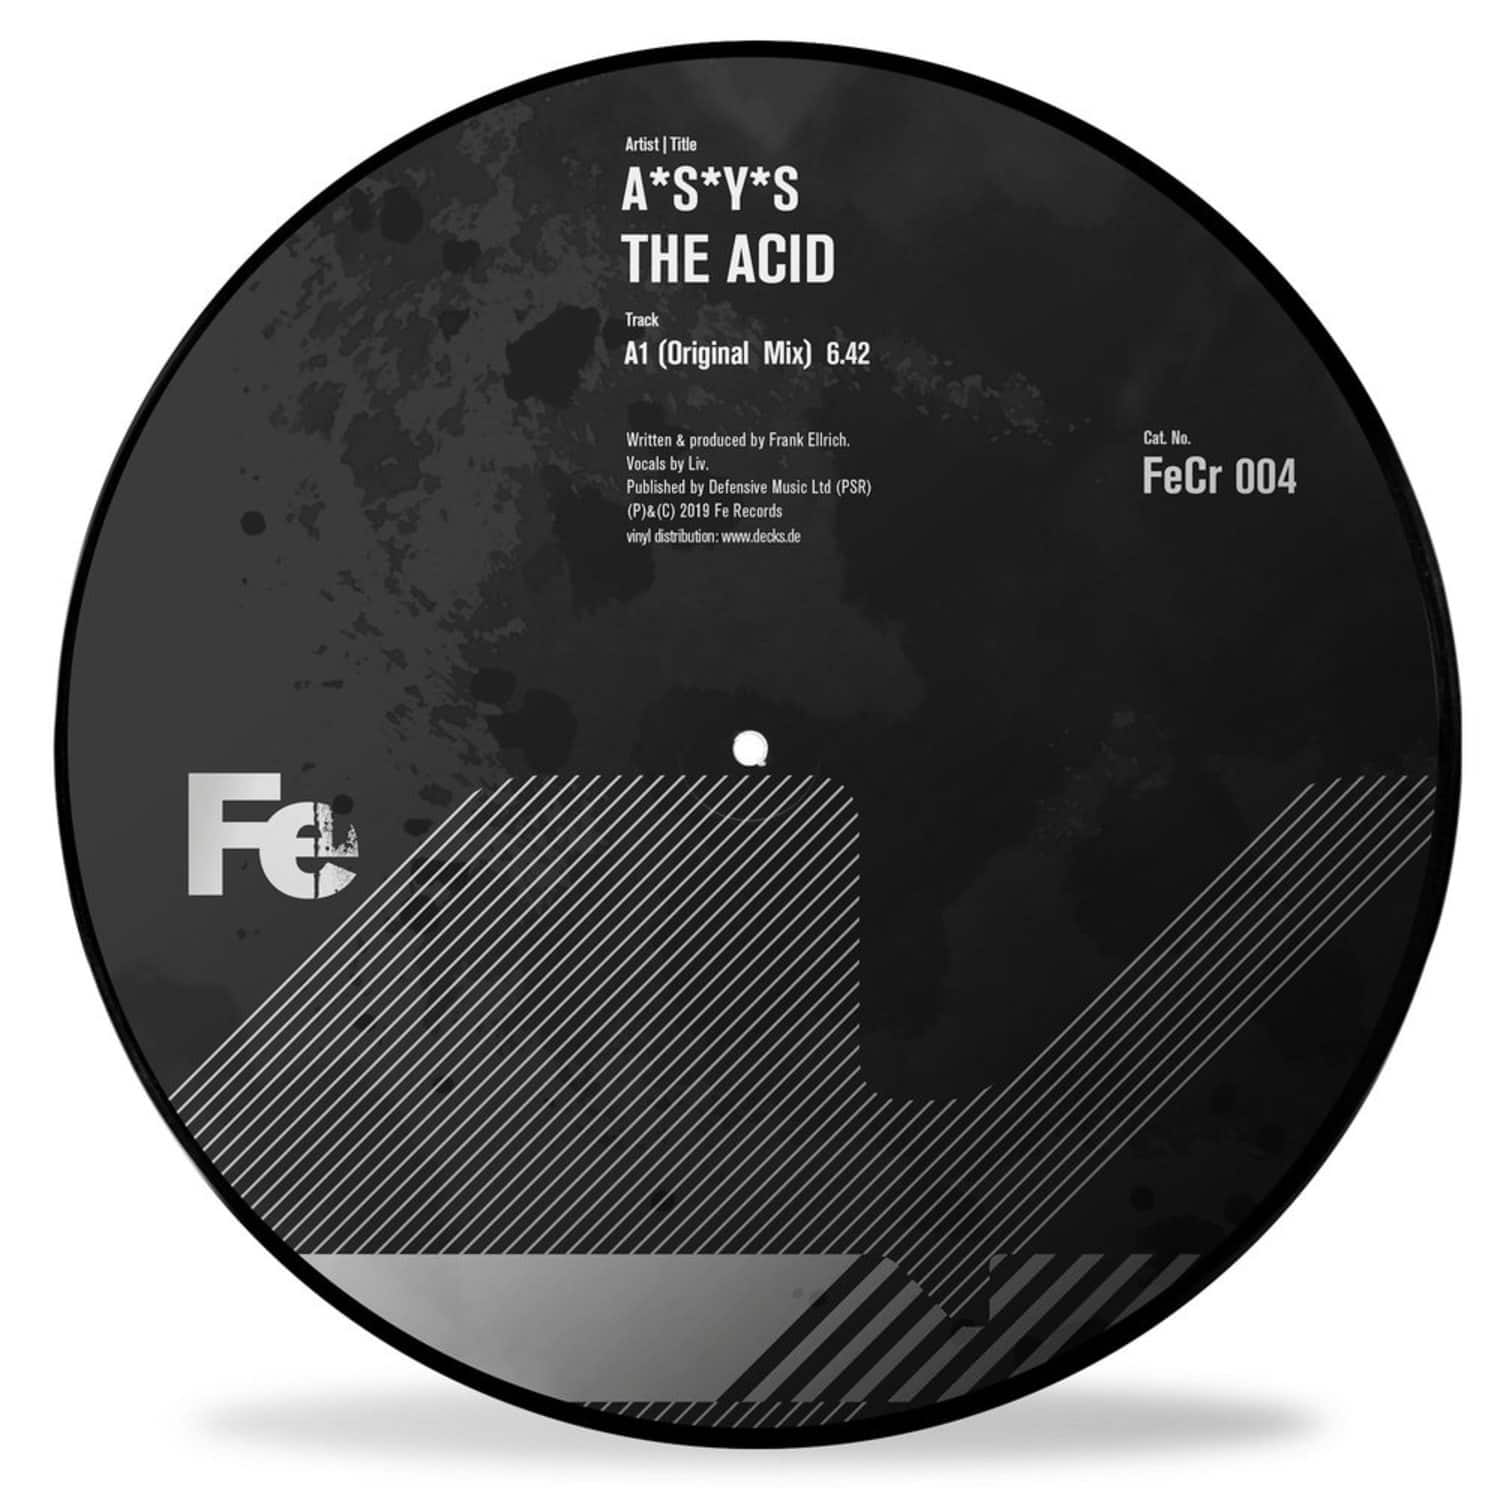 A*S*Y*S - THE ACID